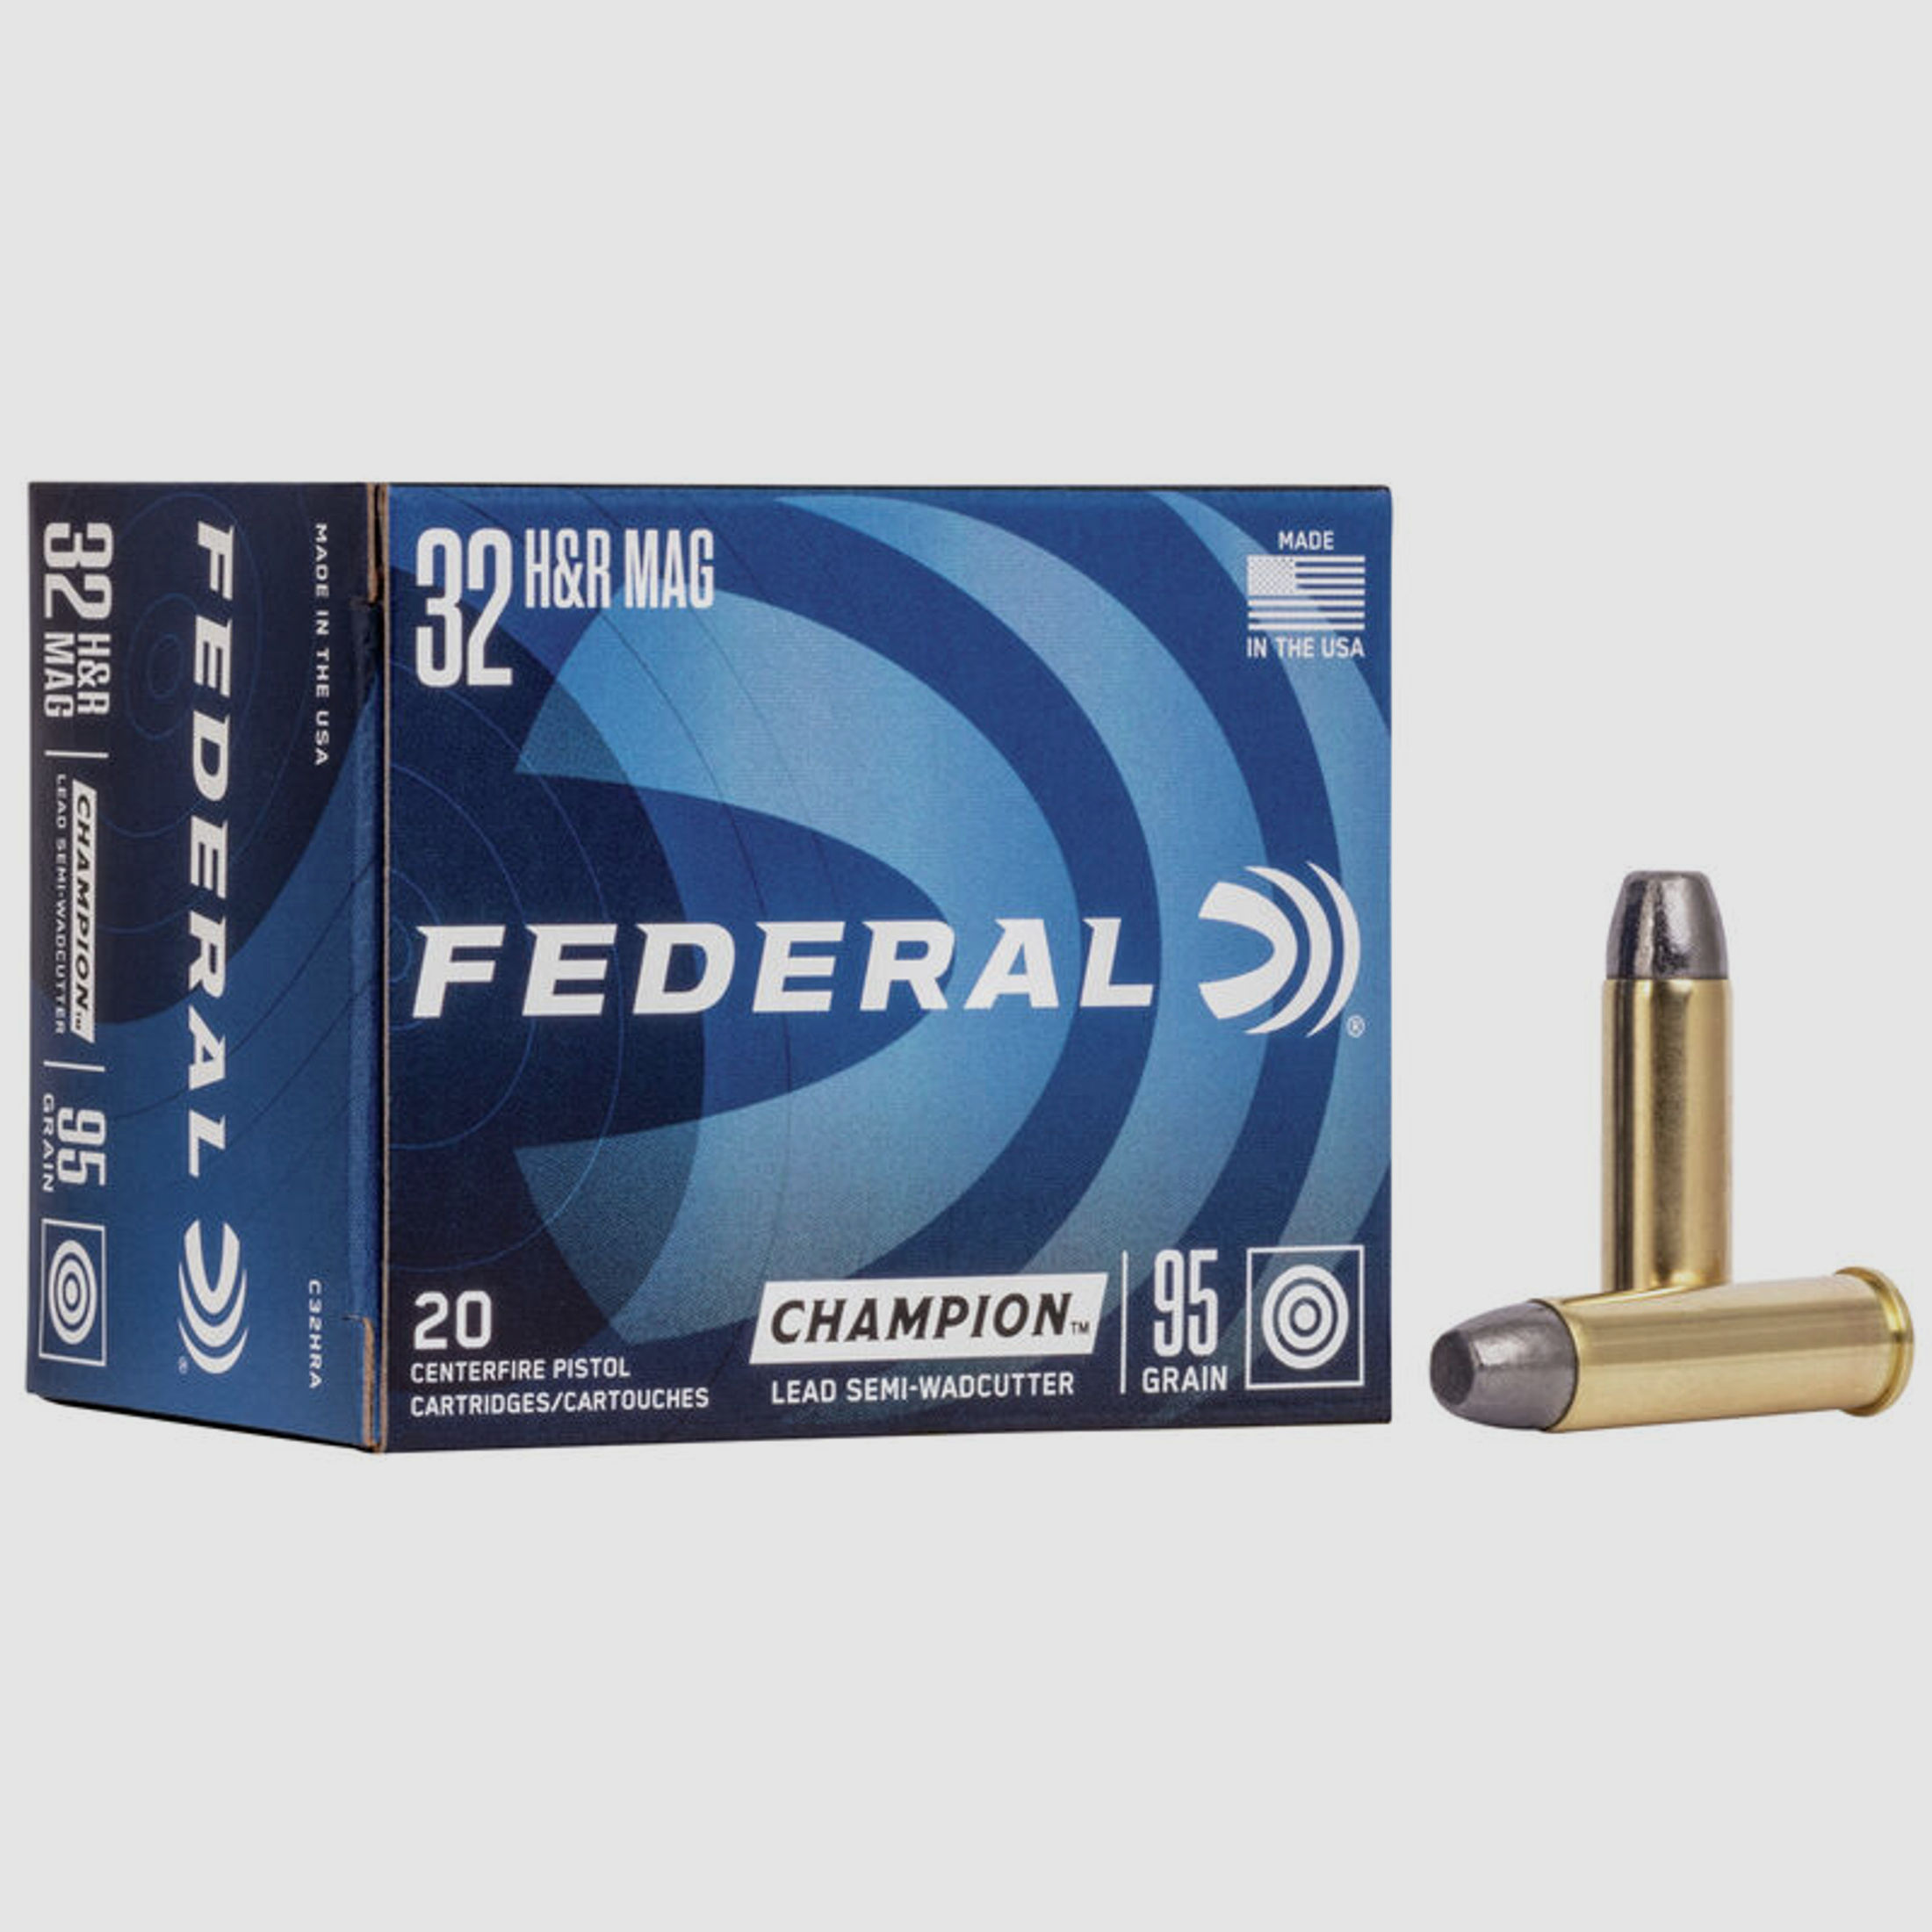 Federal Champion Target .32 H&R Mag. 98GR SWHP 20 Patronen